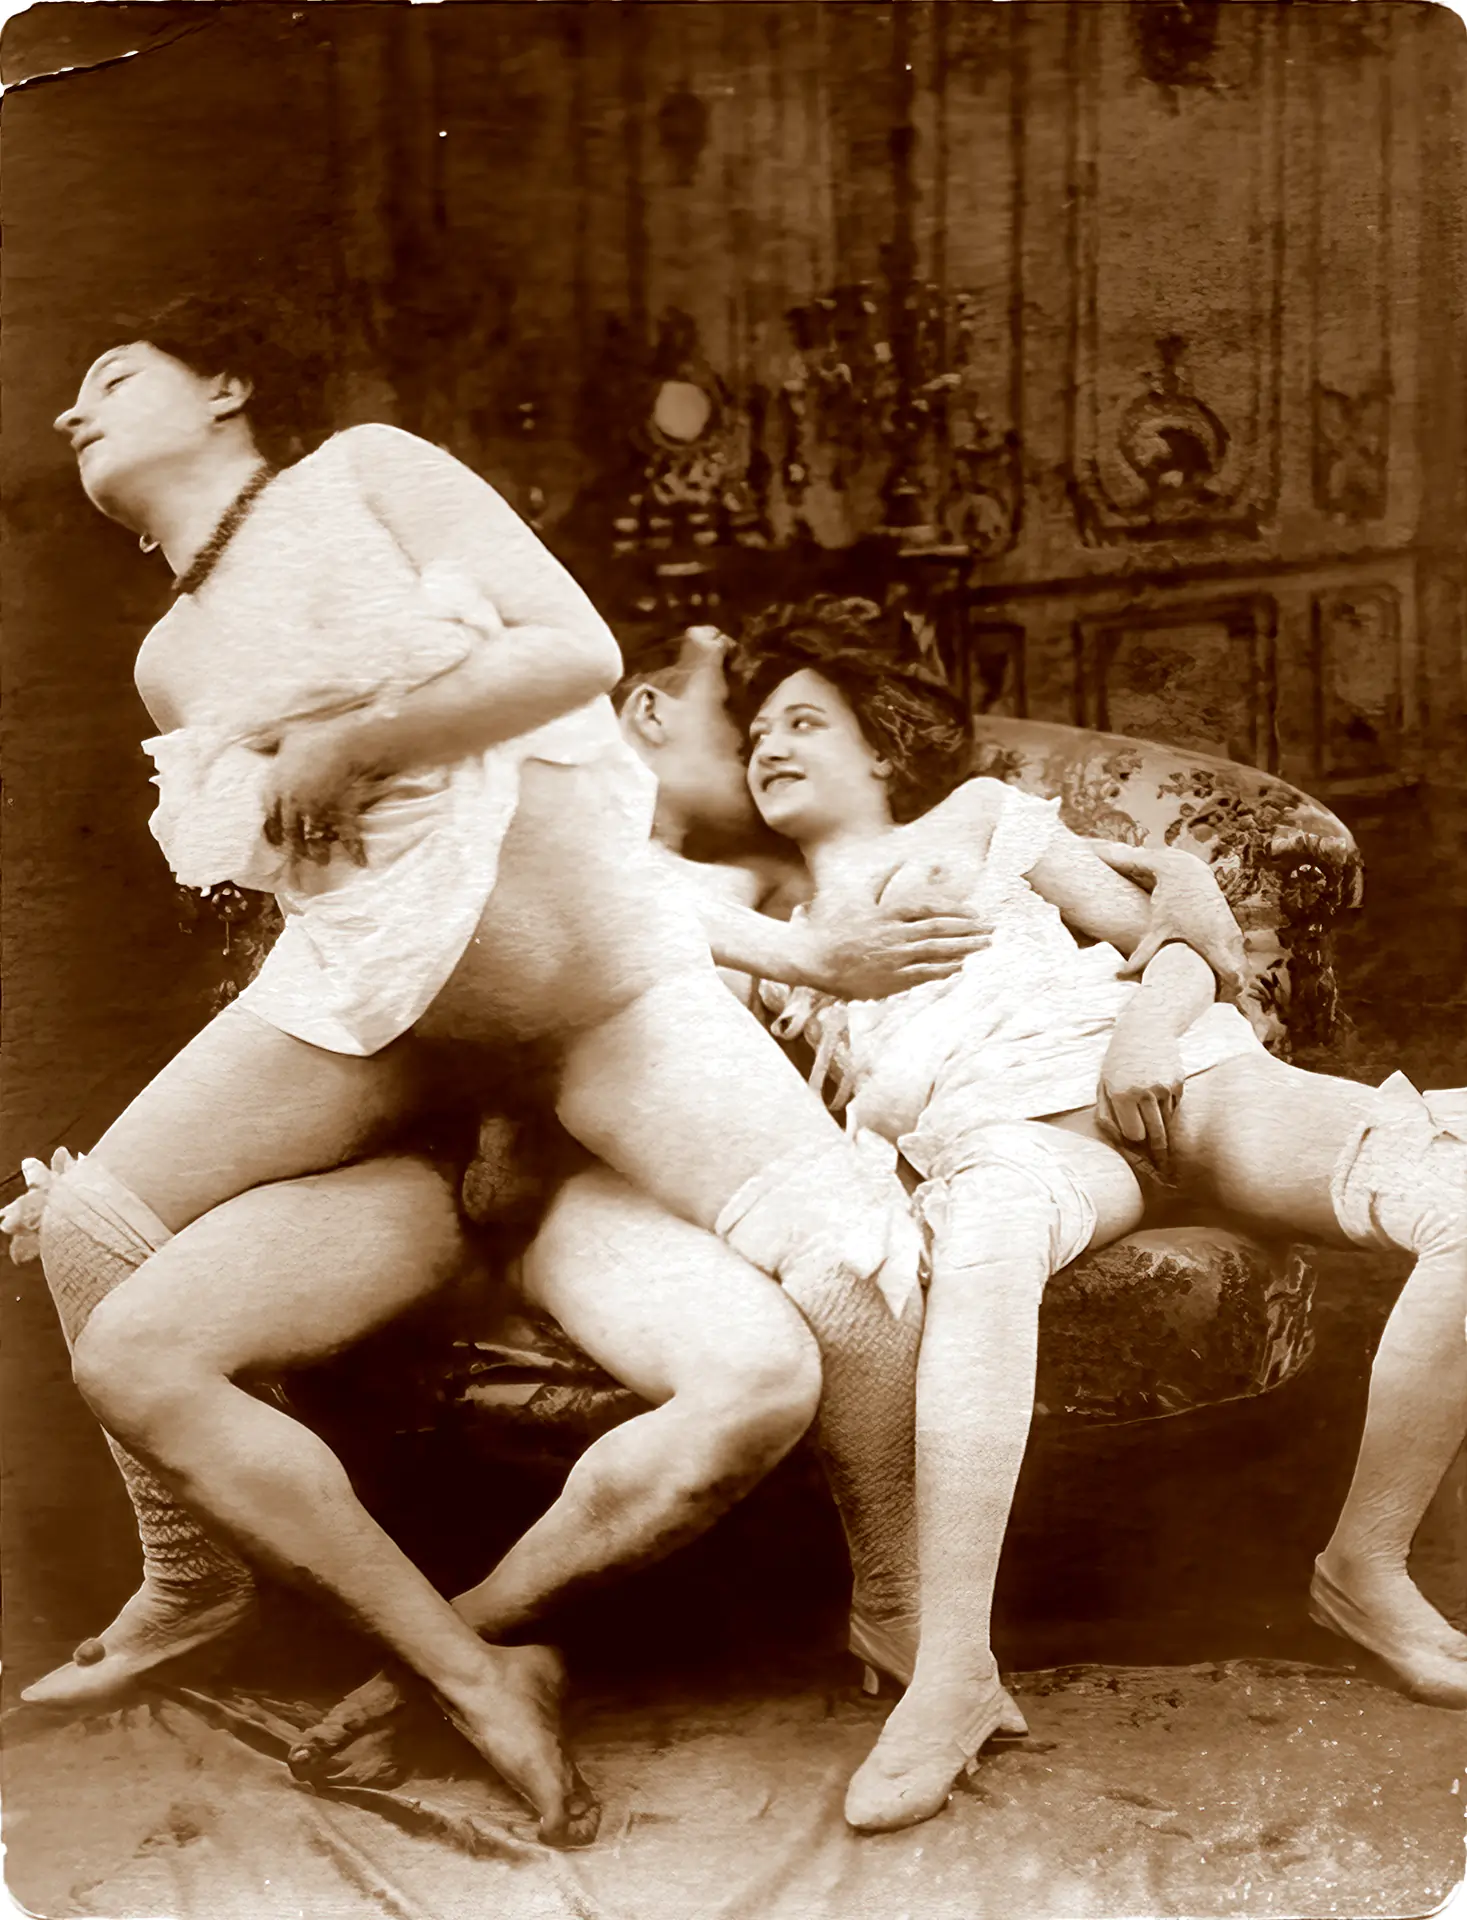 Vintage 19th century porn photo Antique porn: maid rides an erect cock while her girlfriend touches herself